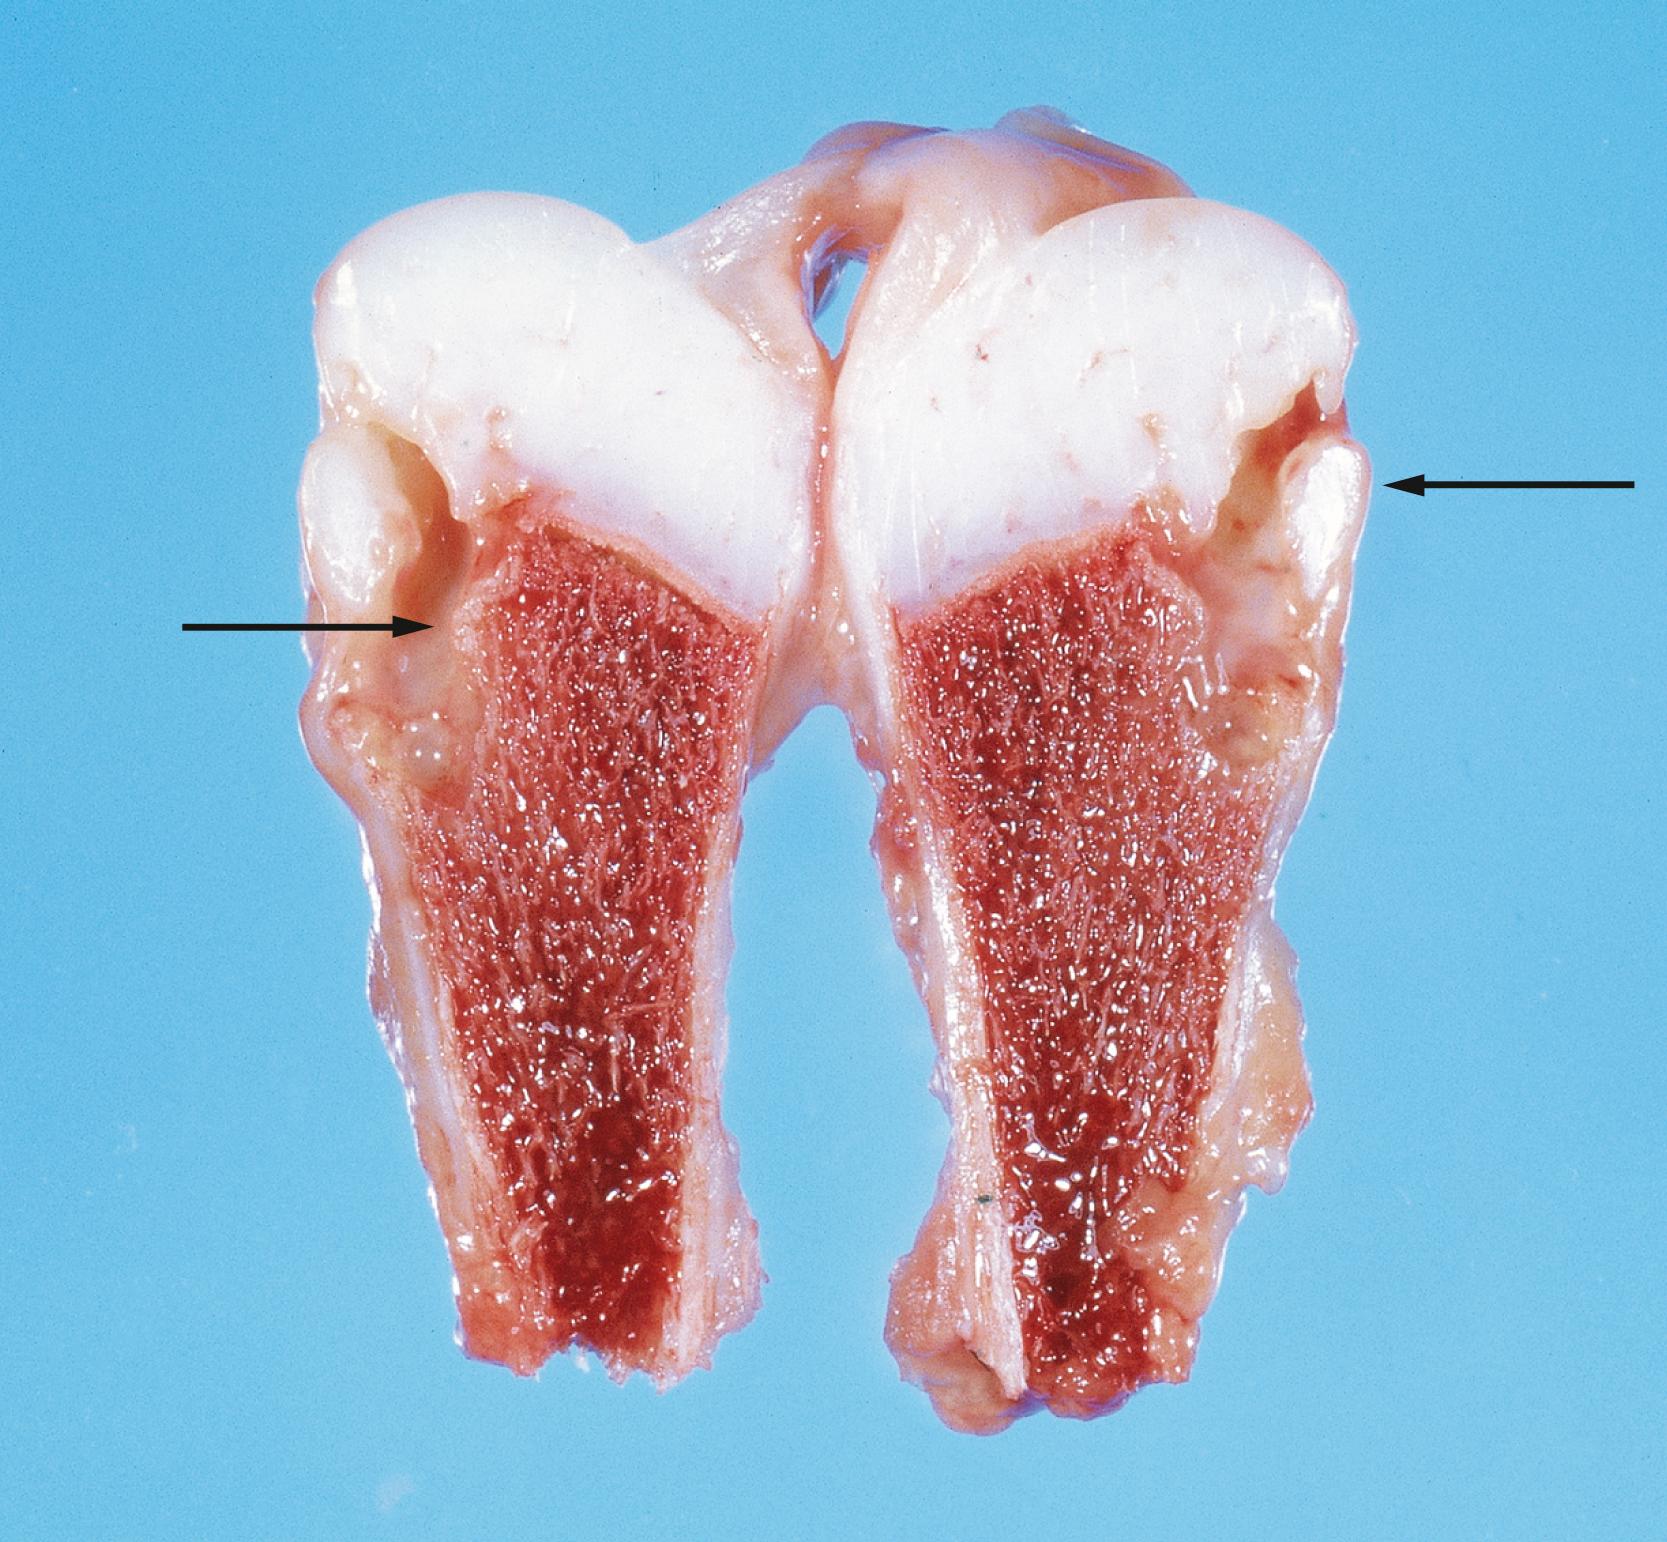 FIGURE 75.1, Gross specimen shows osteomyelitis of the proximal humerus in a 6-week-old infant. Note the metaphyseal location and bony destruction ( arrows ).